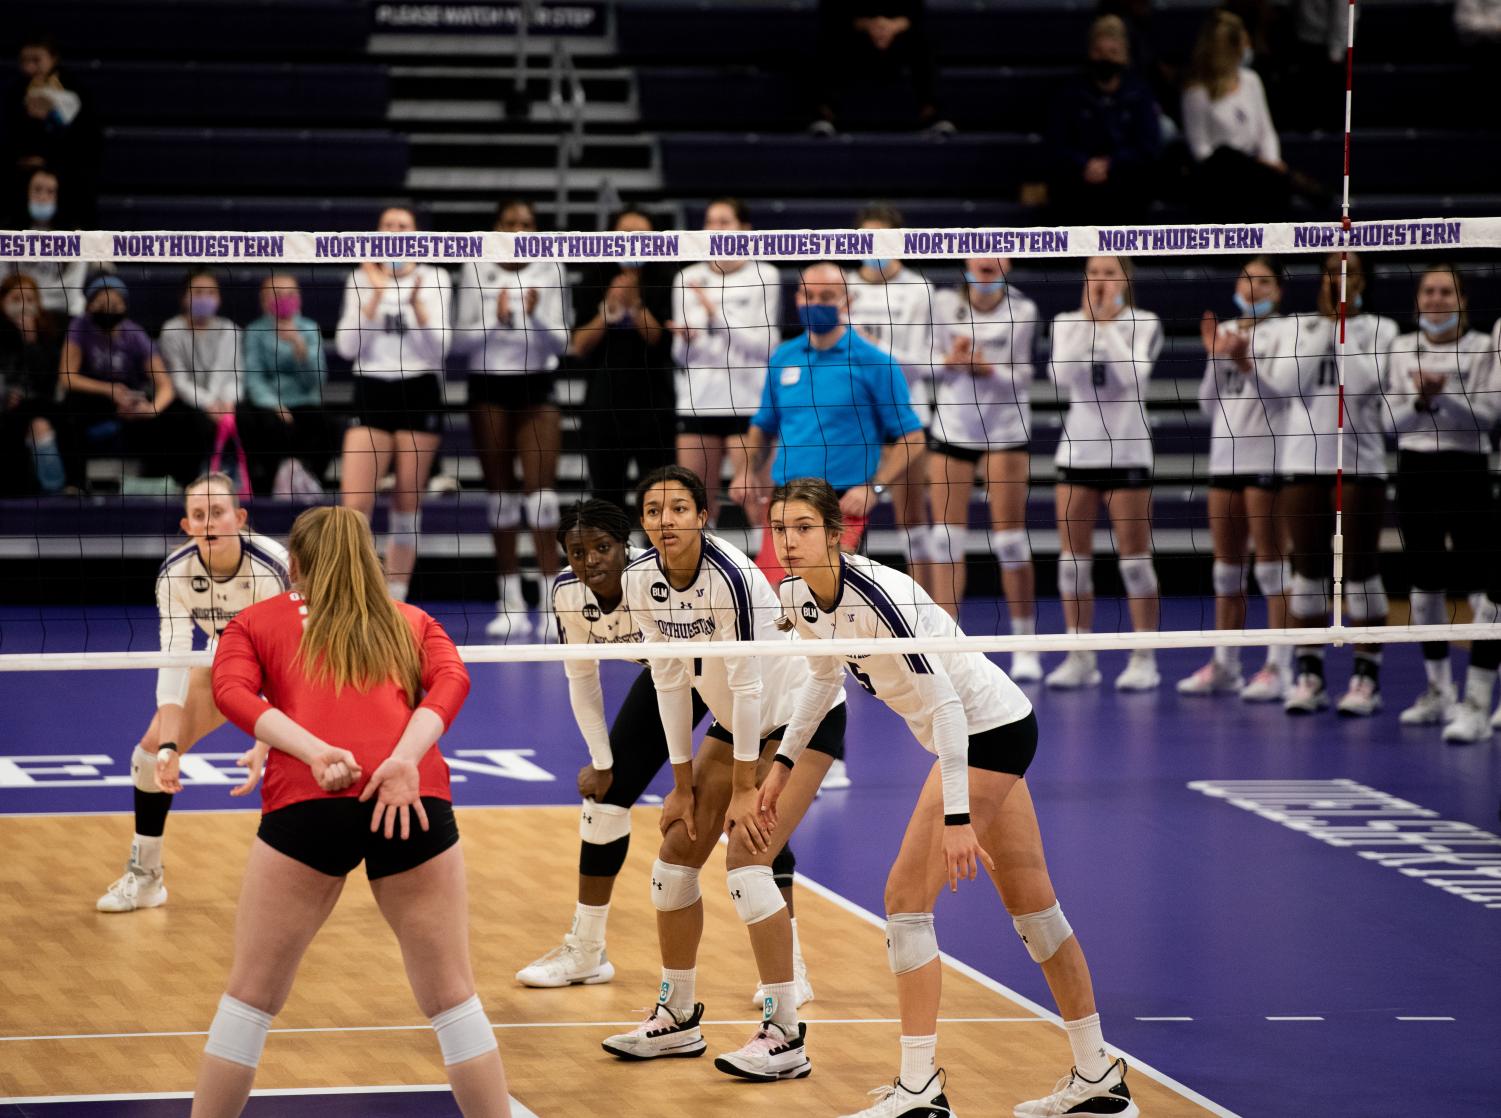 Charlotte+Cronister%2C+Temi+Thomas-Ailara%2C+Leilani+Dodson+and+Alexa+Rousseau+stand+with+their+knees+bent+behind+a+net+on+a+volleyball+court+across+from+an+Ohio+State+player.